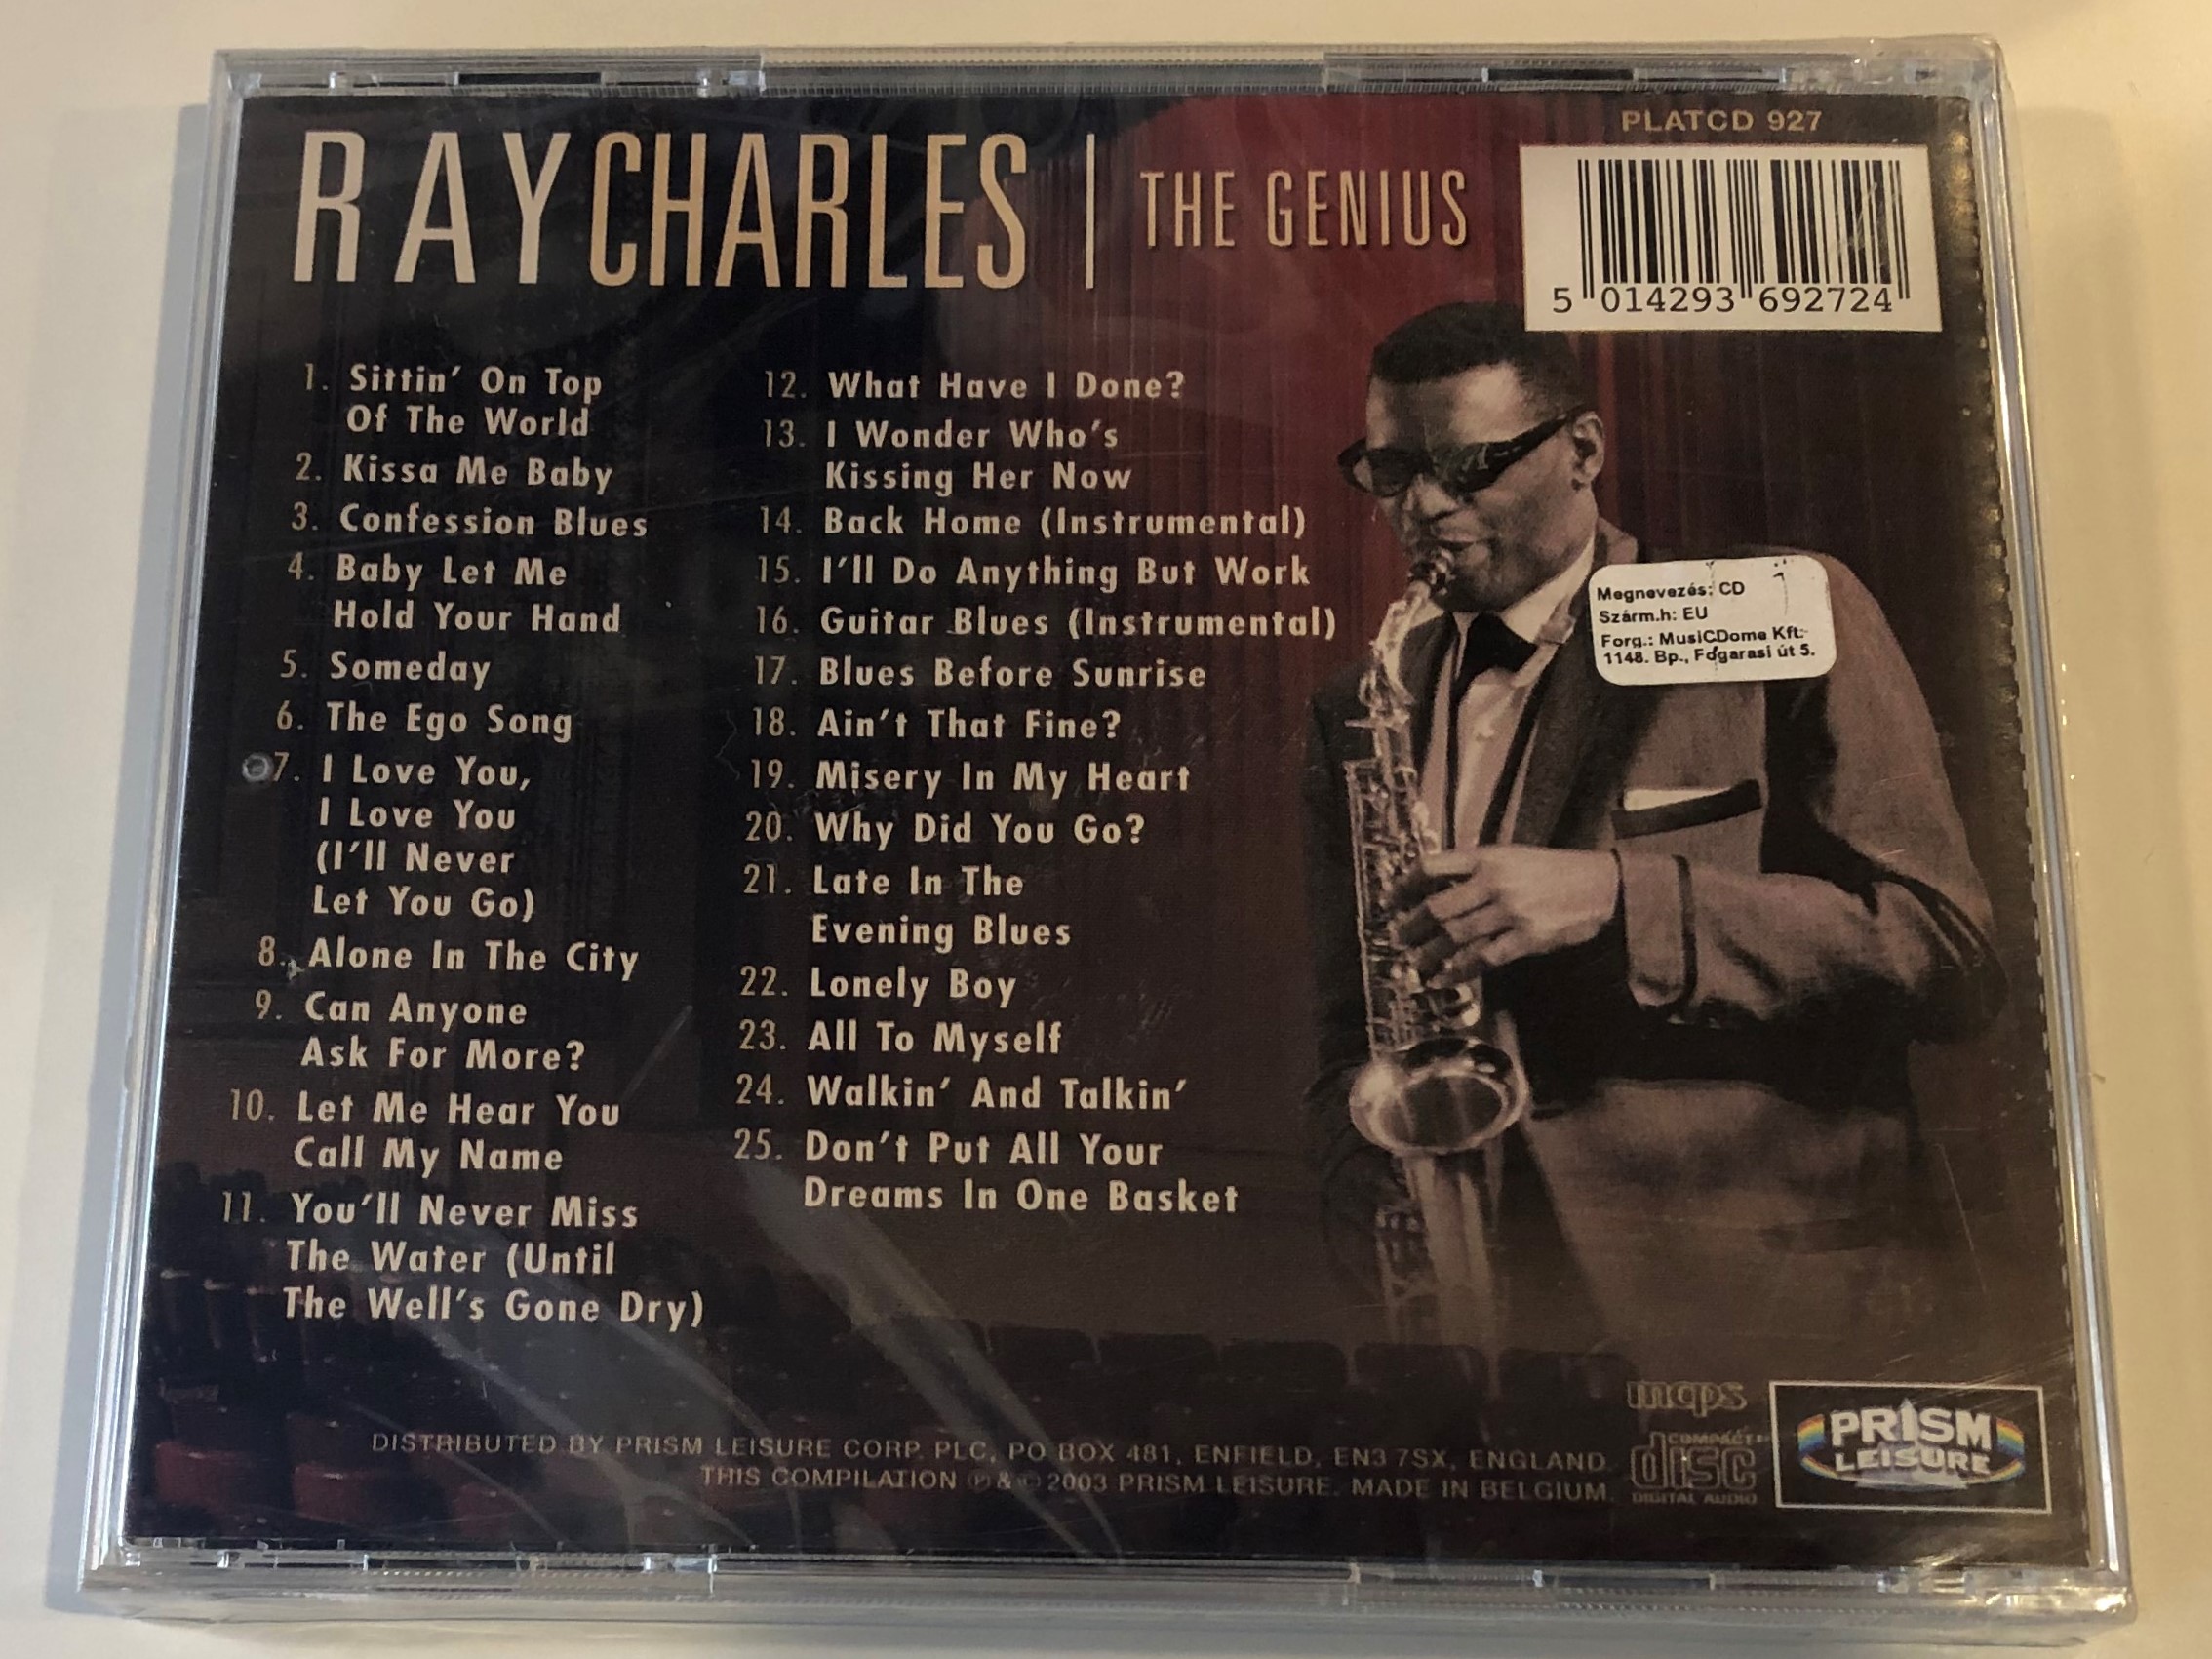 ray-charles-the-genius-the-grand-master-includes-confession-blues-blues-before-sunrise-all-to-myself-kissa-me-baby-sittin-on-top-of-the-world-prism-leisure-audio-cd-2003-platcd-927.jpg